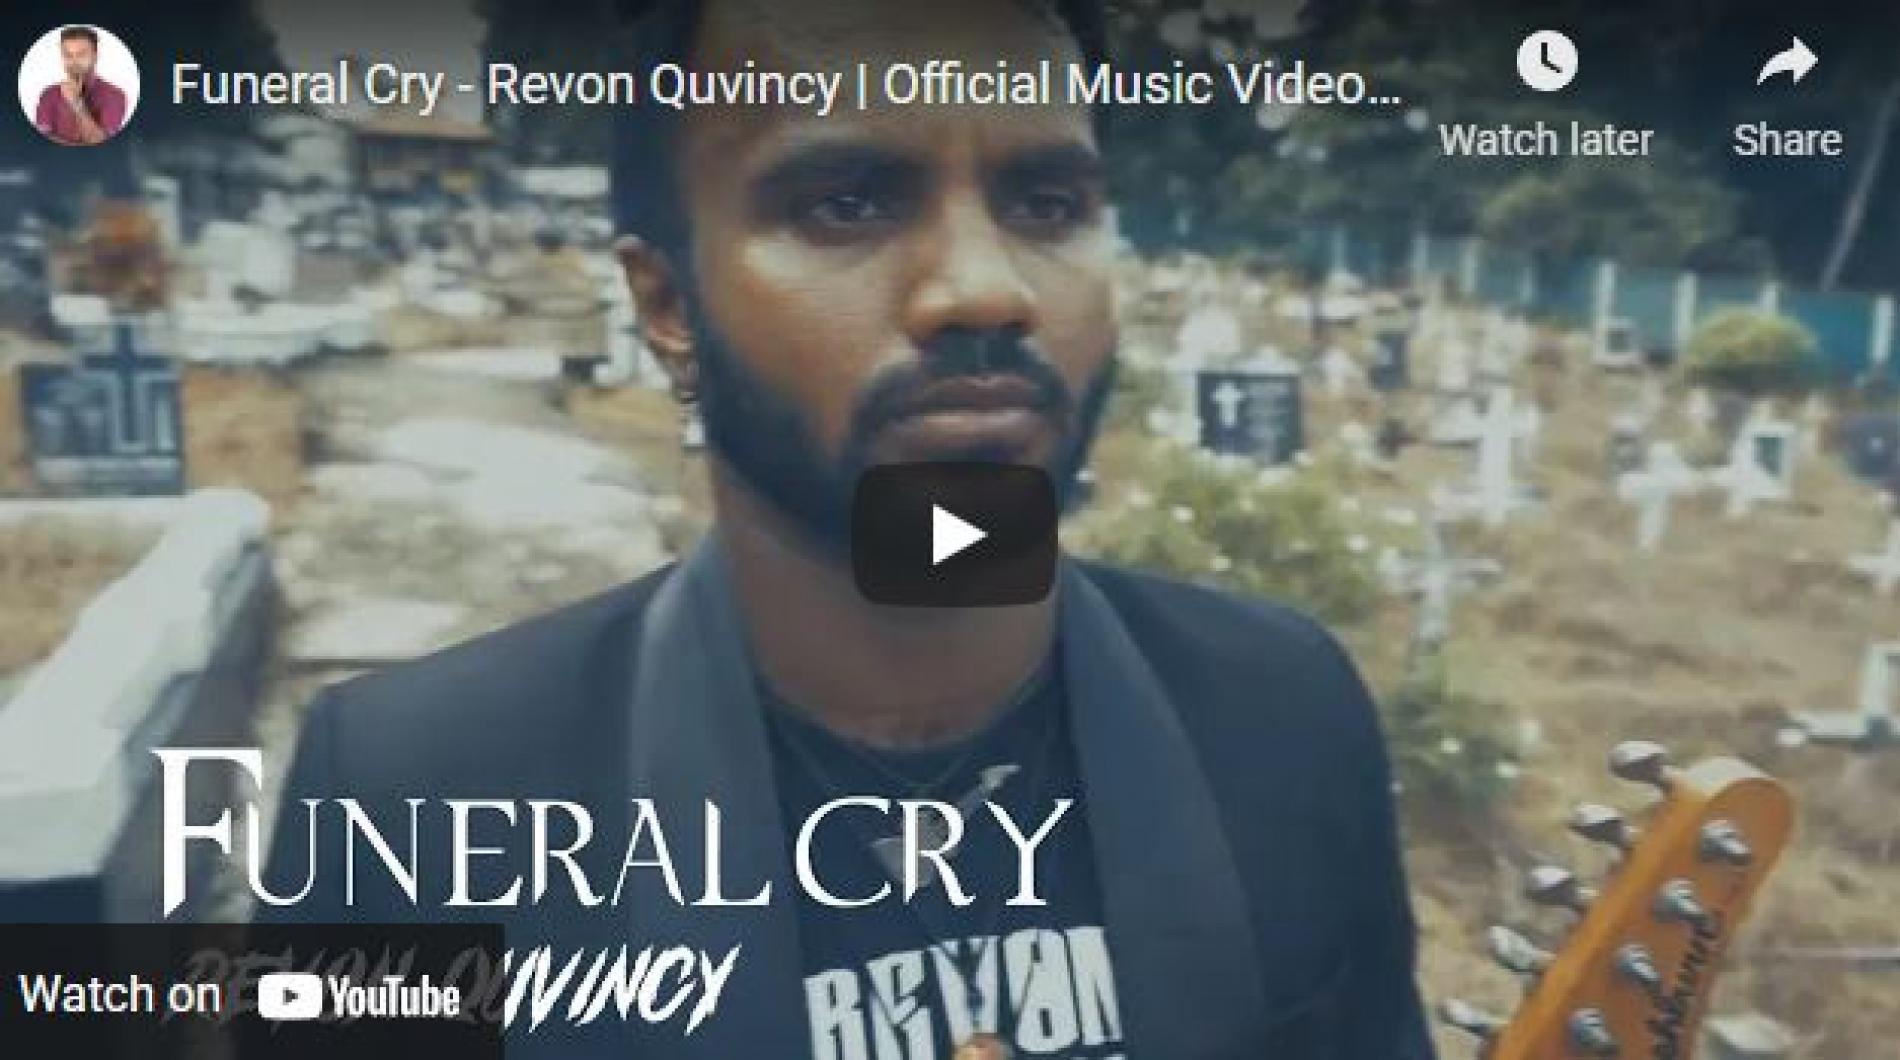 New Music : Funeral Cry – Revon Quvincy | Official Music Video